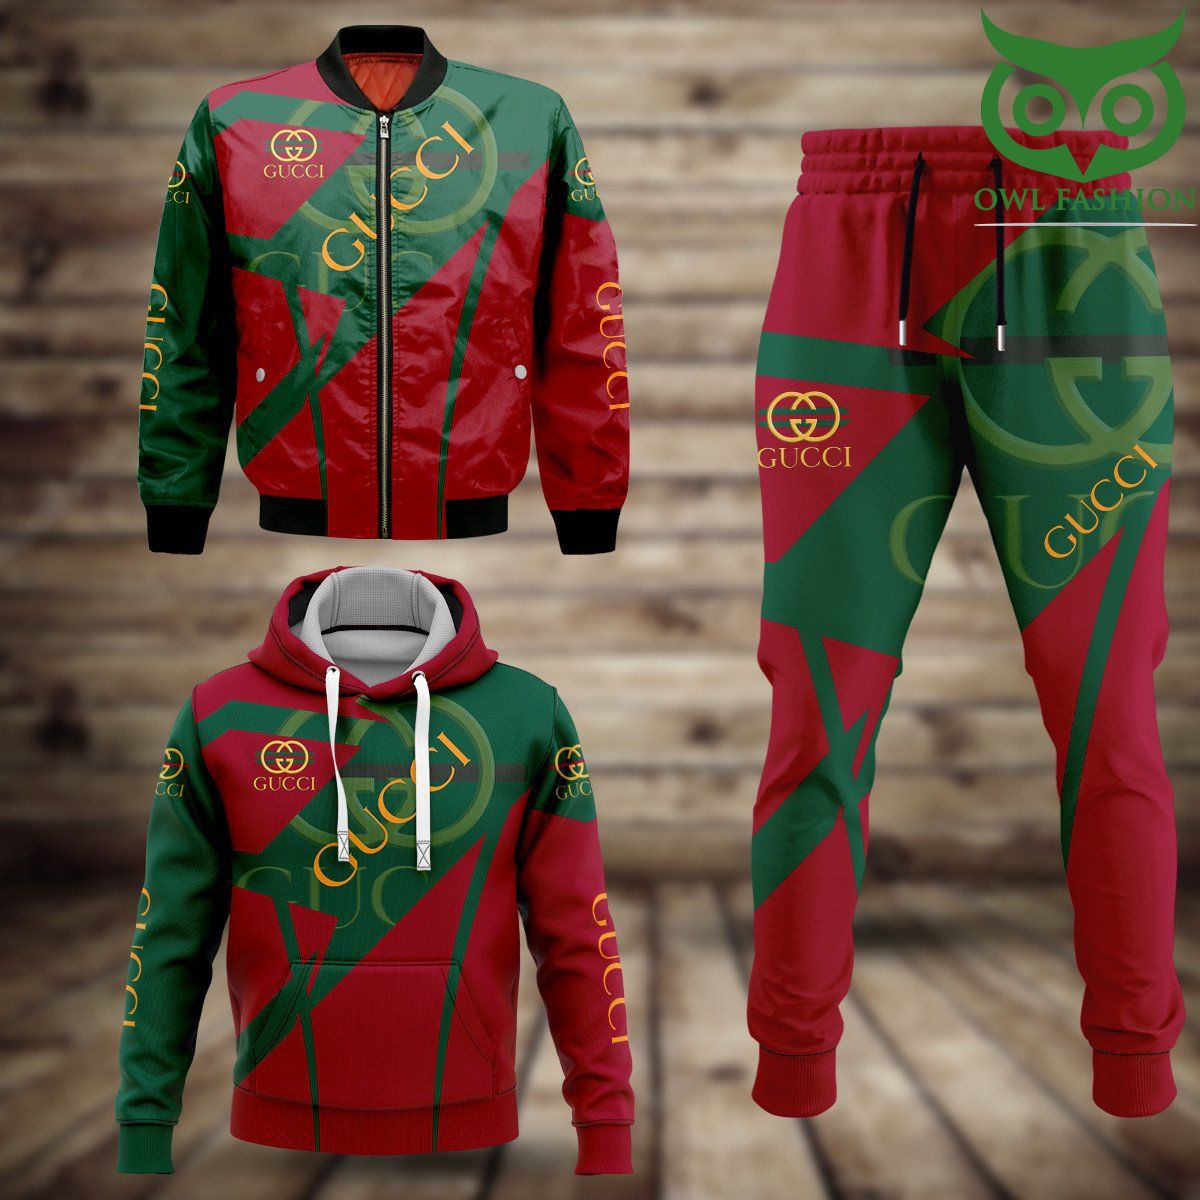 17 Gucci red and green Fashion Bomber Jacket Hoodie and Pants